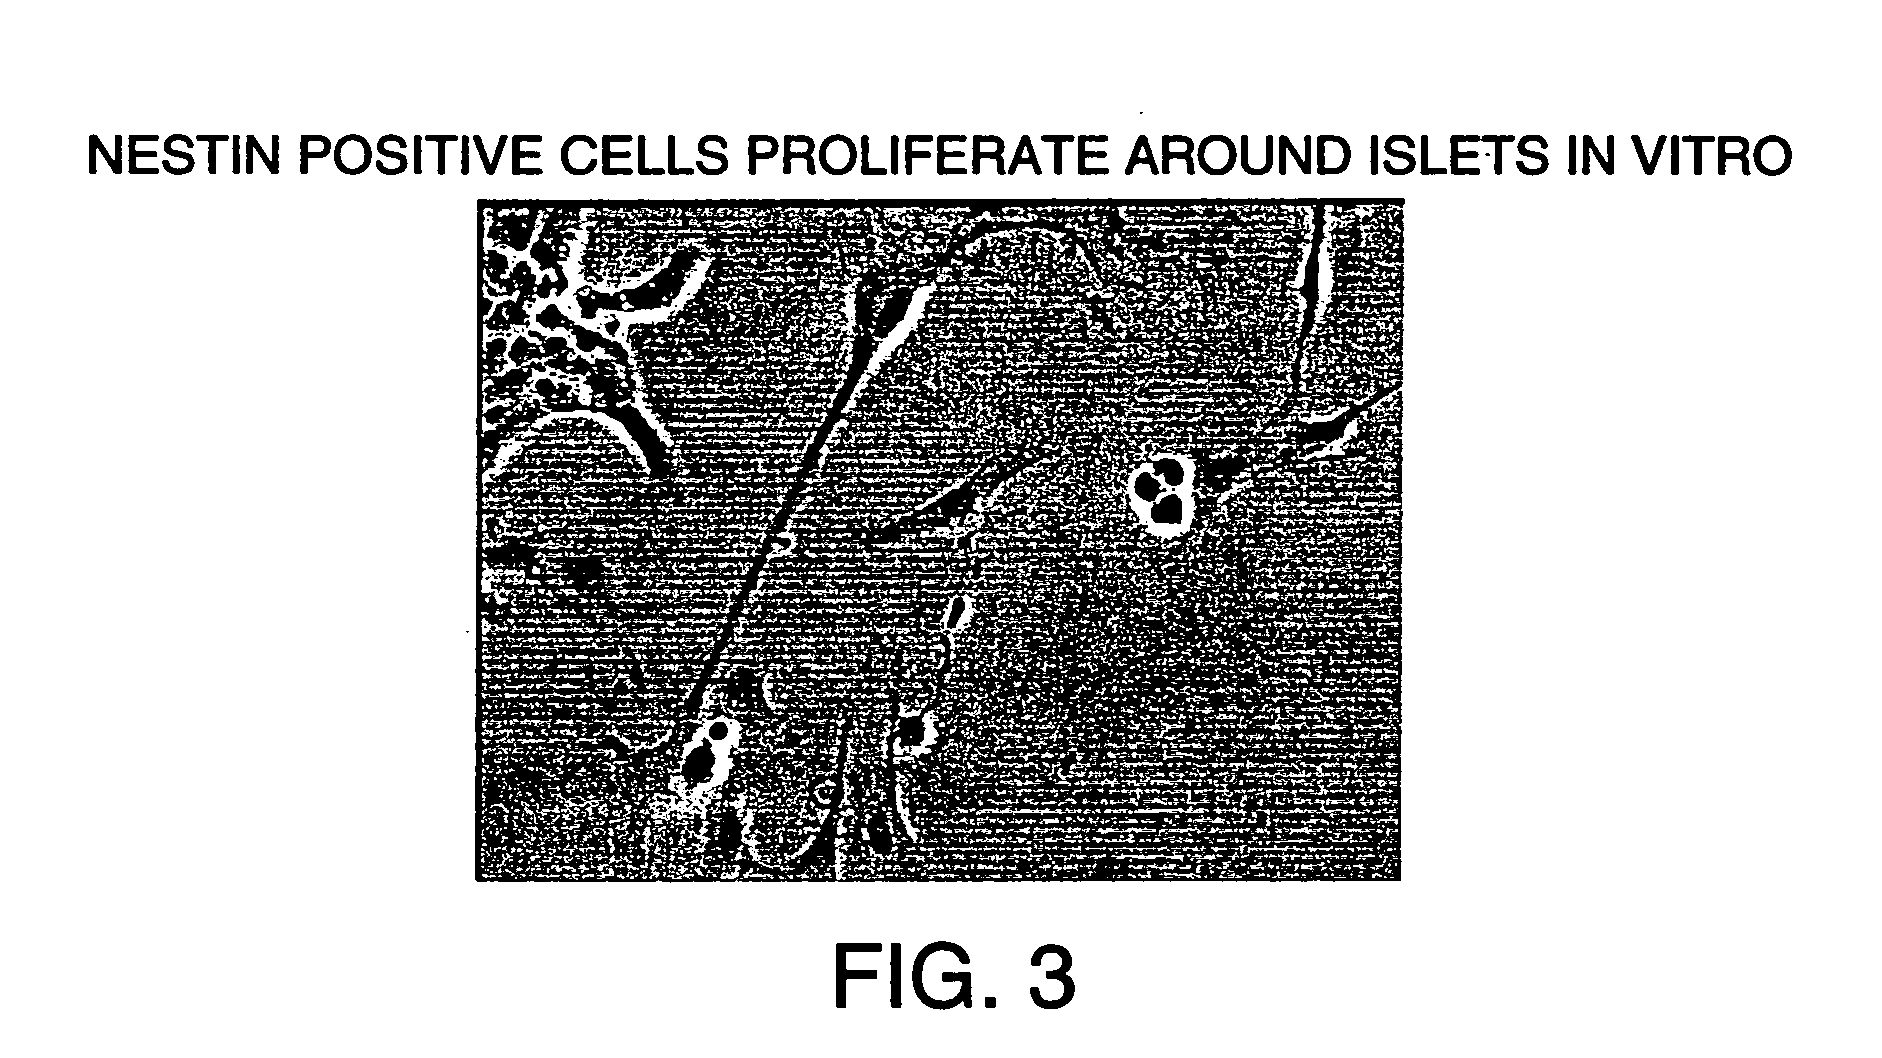 Method of transplanting in a mammal and treating diabetes mellitus by administering a pseudo-islet like aggregate differentiated from a nestin-positive pancreatic stem cell